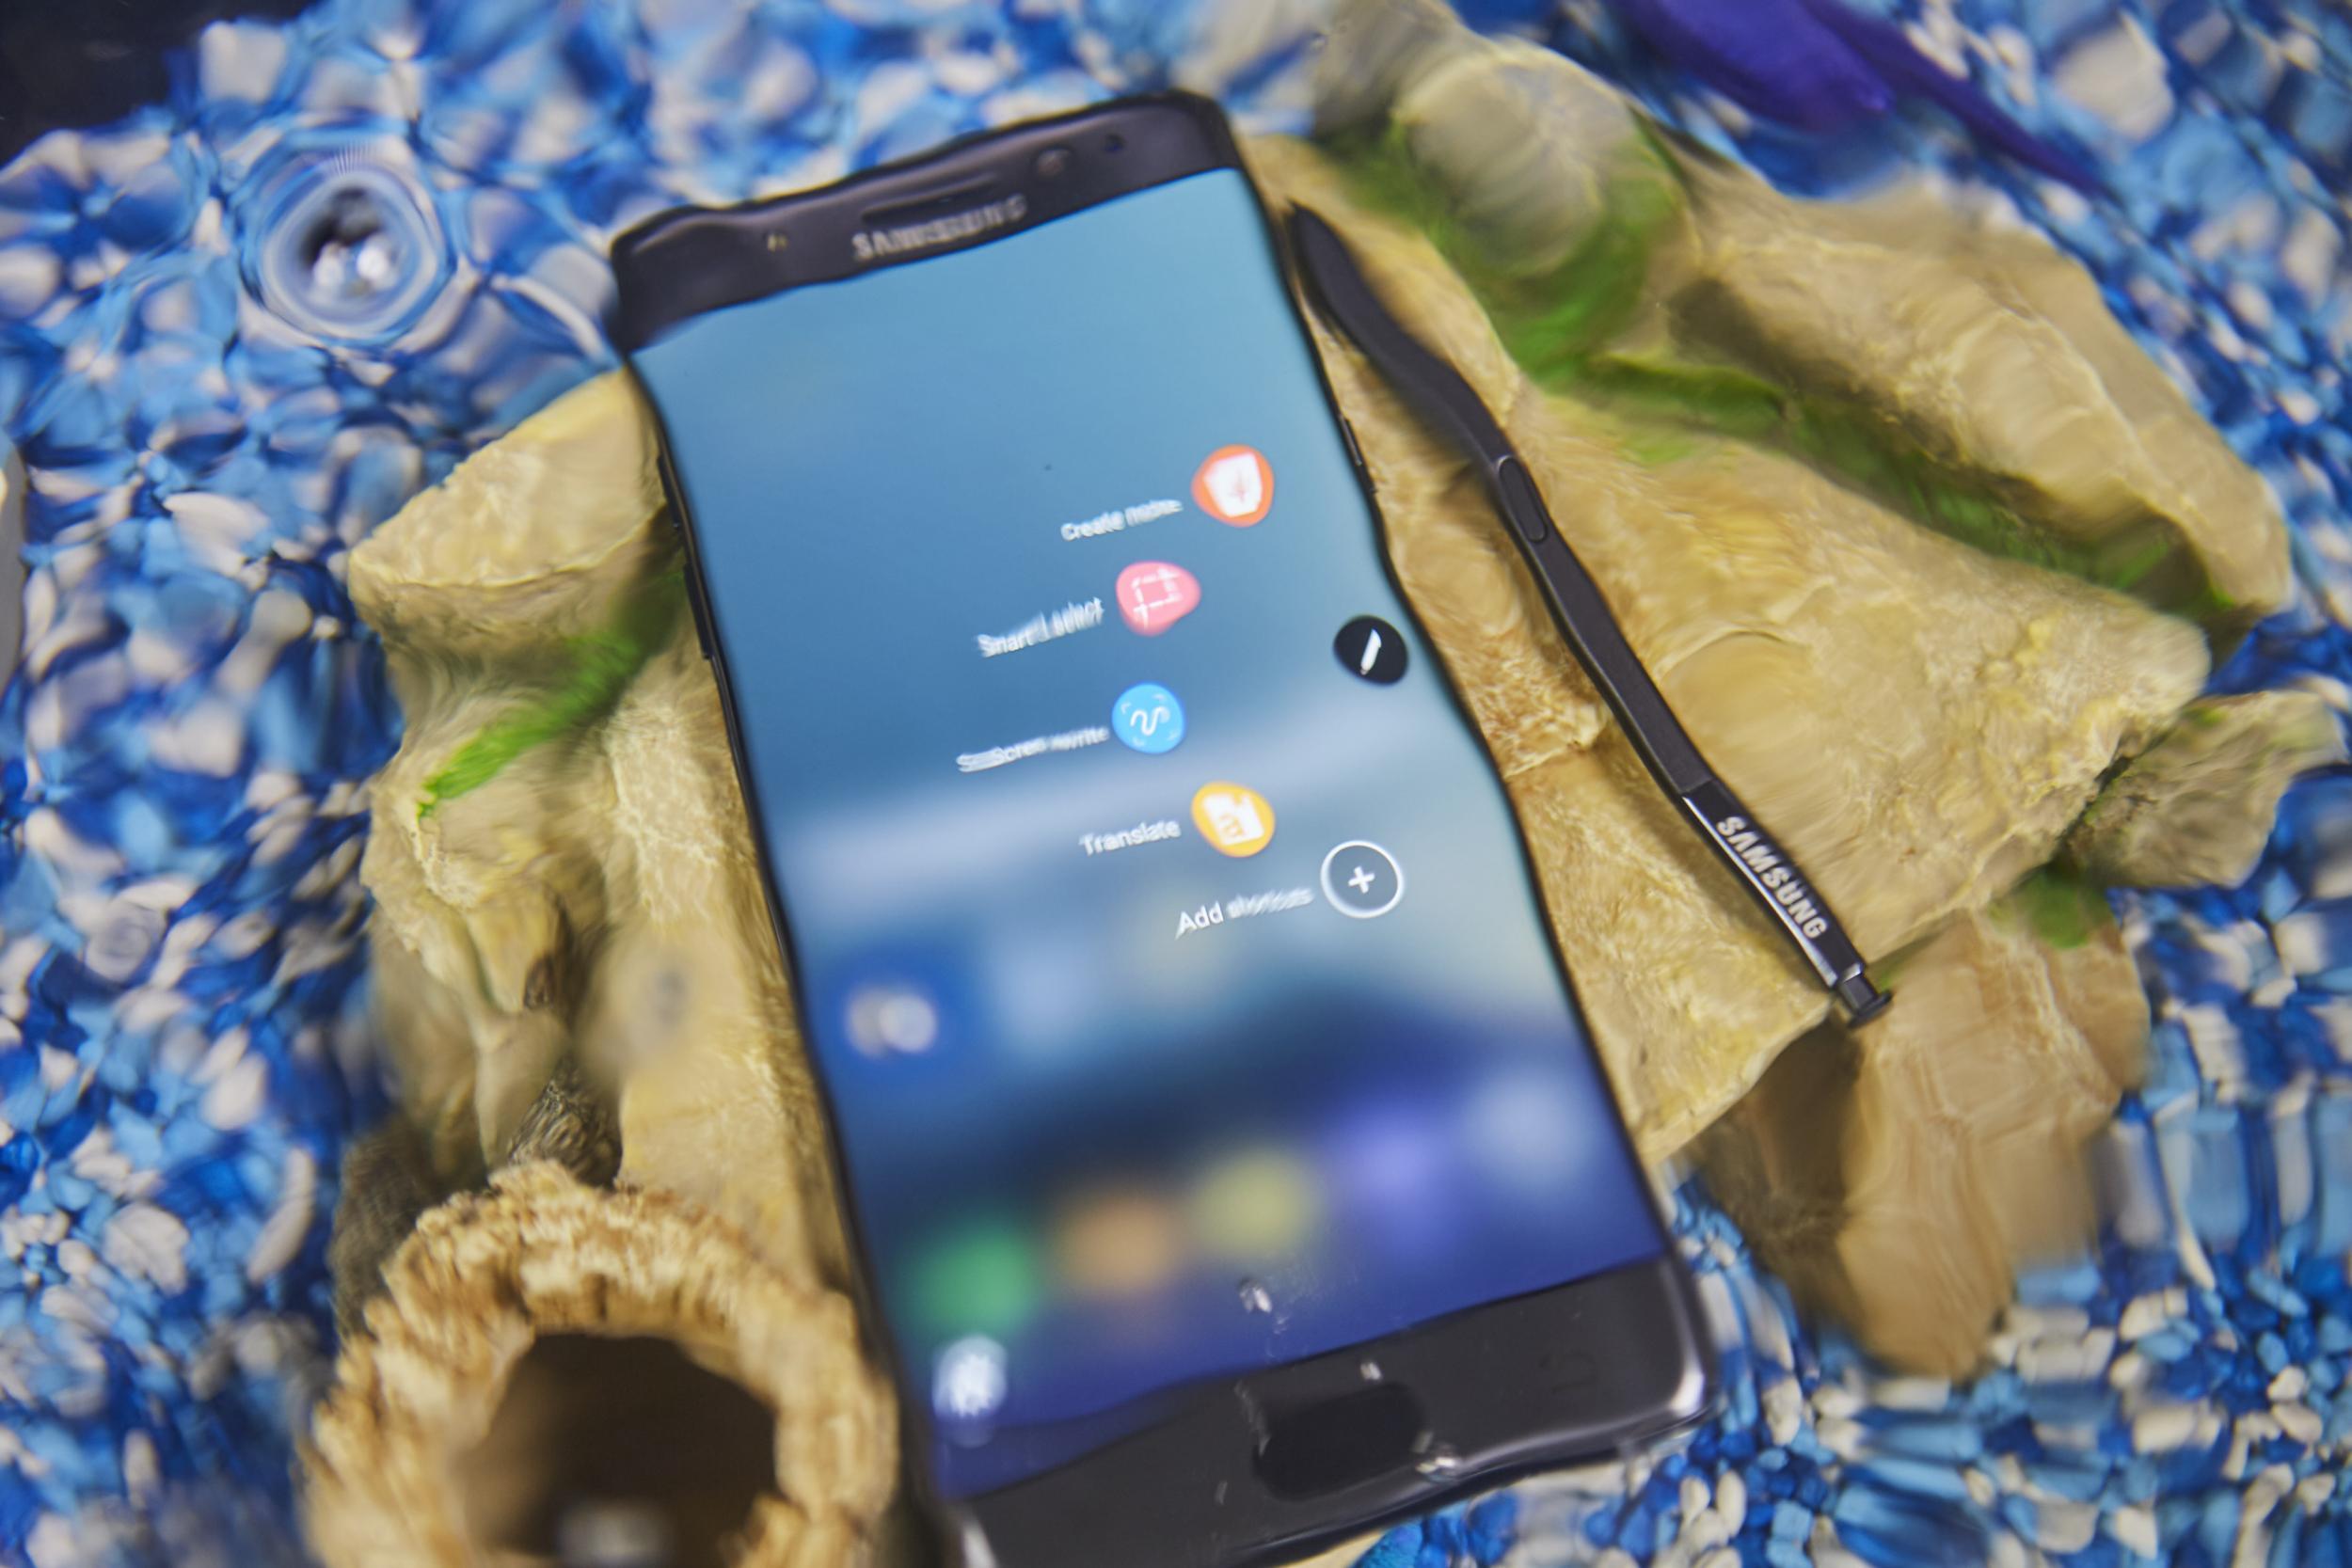 The Galaxy Note 7 – and its stylus – underwater, where it works fine